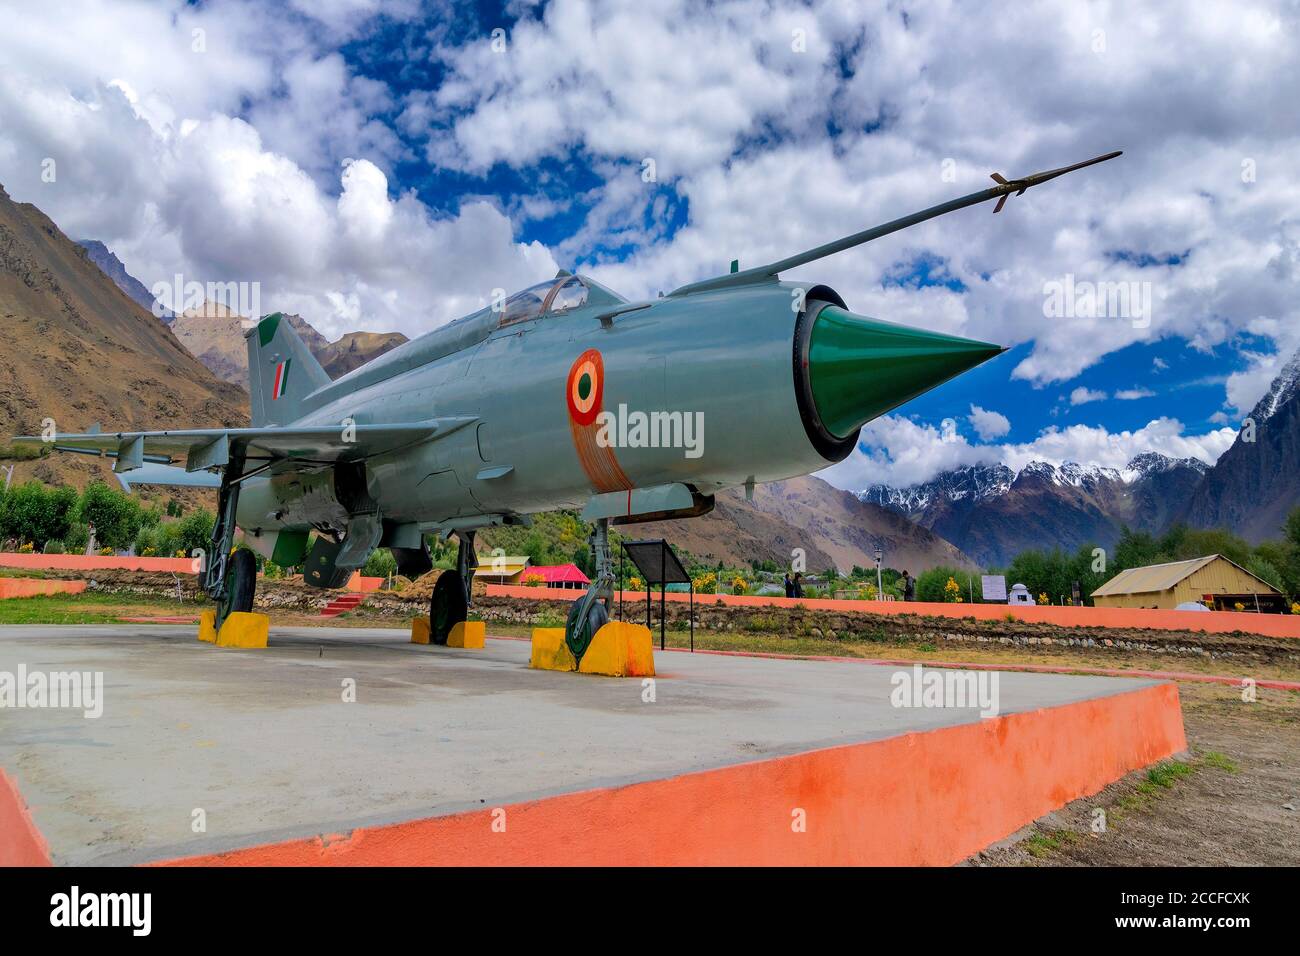 Kargil, Jammu and Kashmir,India - September 1ST 2014 : A MIG-21 fighter plane used by India to win in Kargil war 1999 (Operation Vijay). Stock Photo